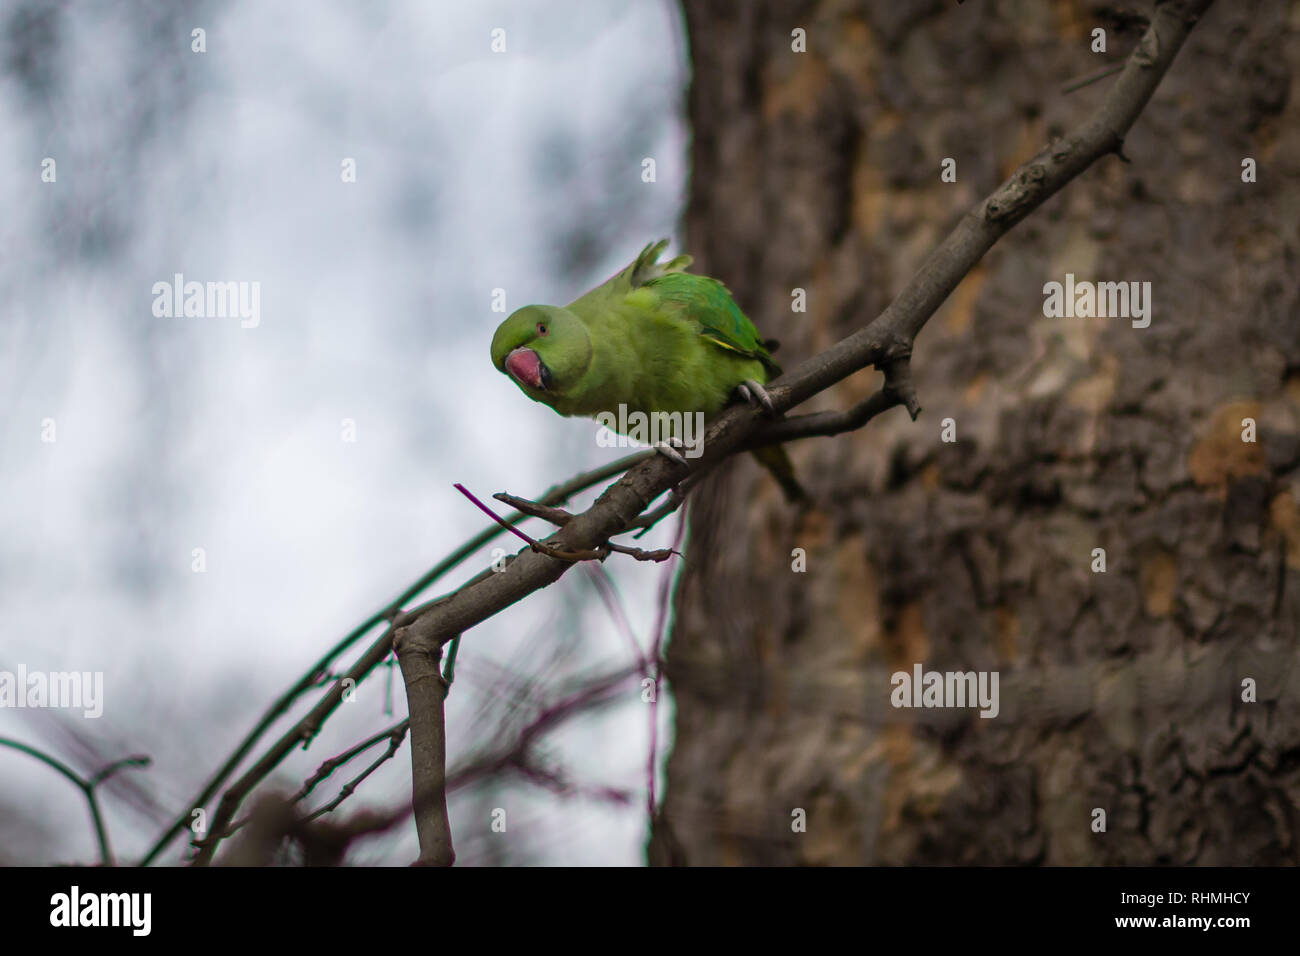 A parakeet perches on a branch in London. Stock Photo